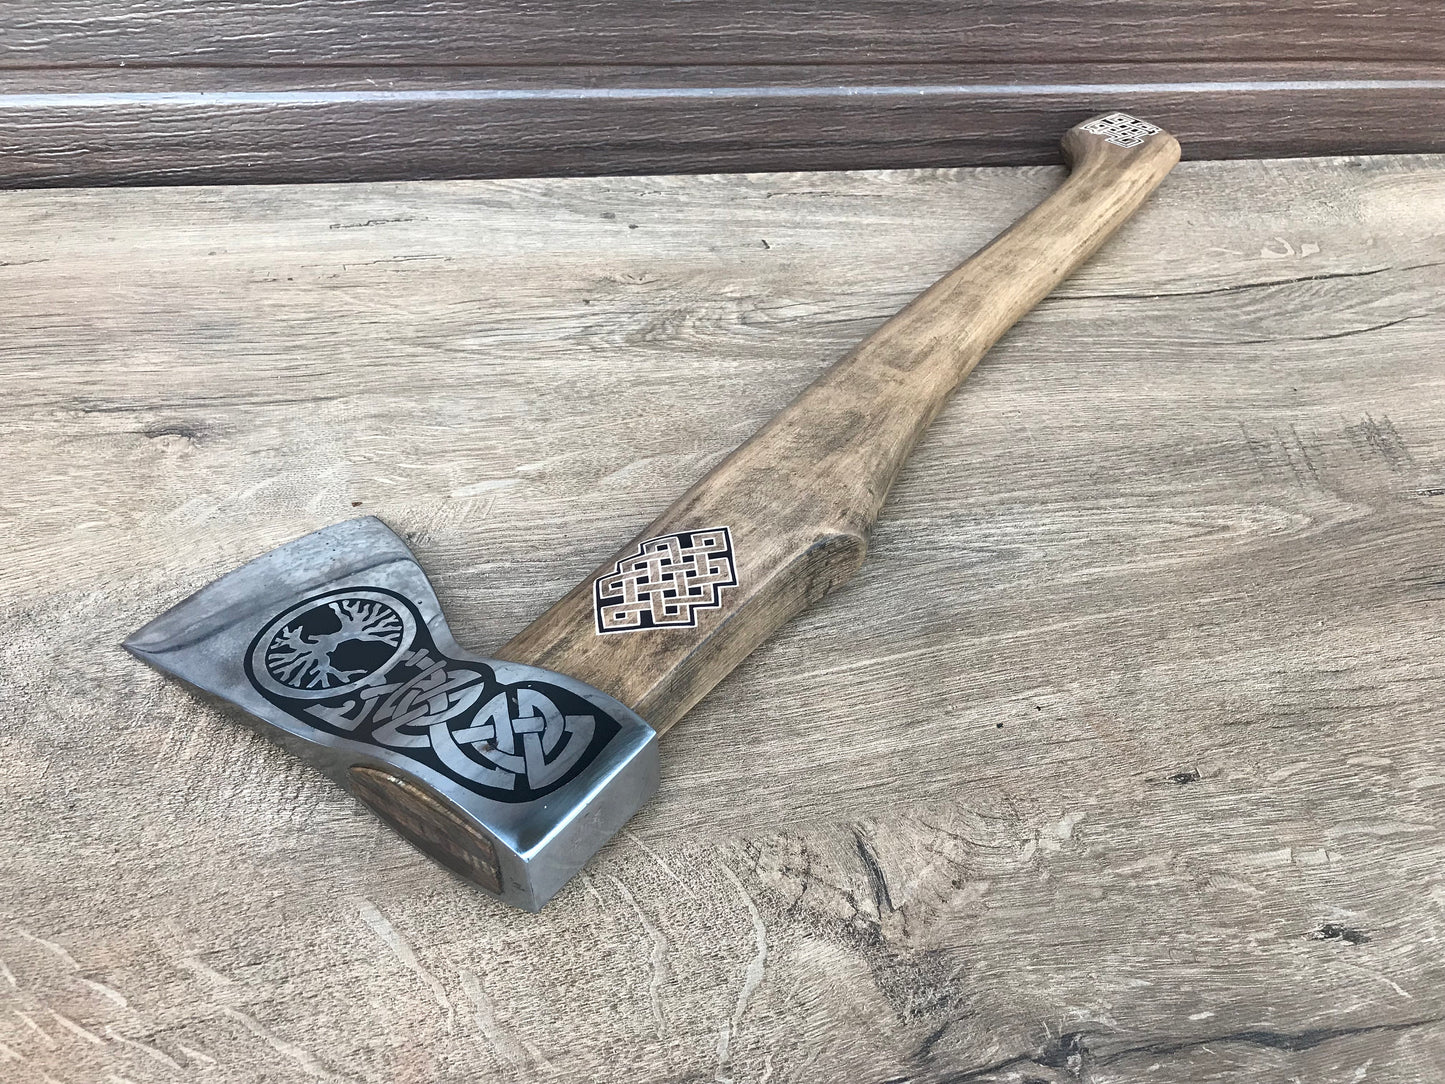 Viking axe, gift for men, gift for dad, gift for husband, axe, ax, tree of life, dads gift, medieval accessory, ancient accessory, mens gift